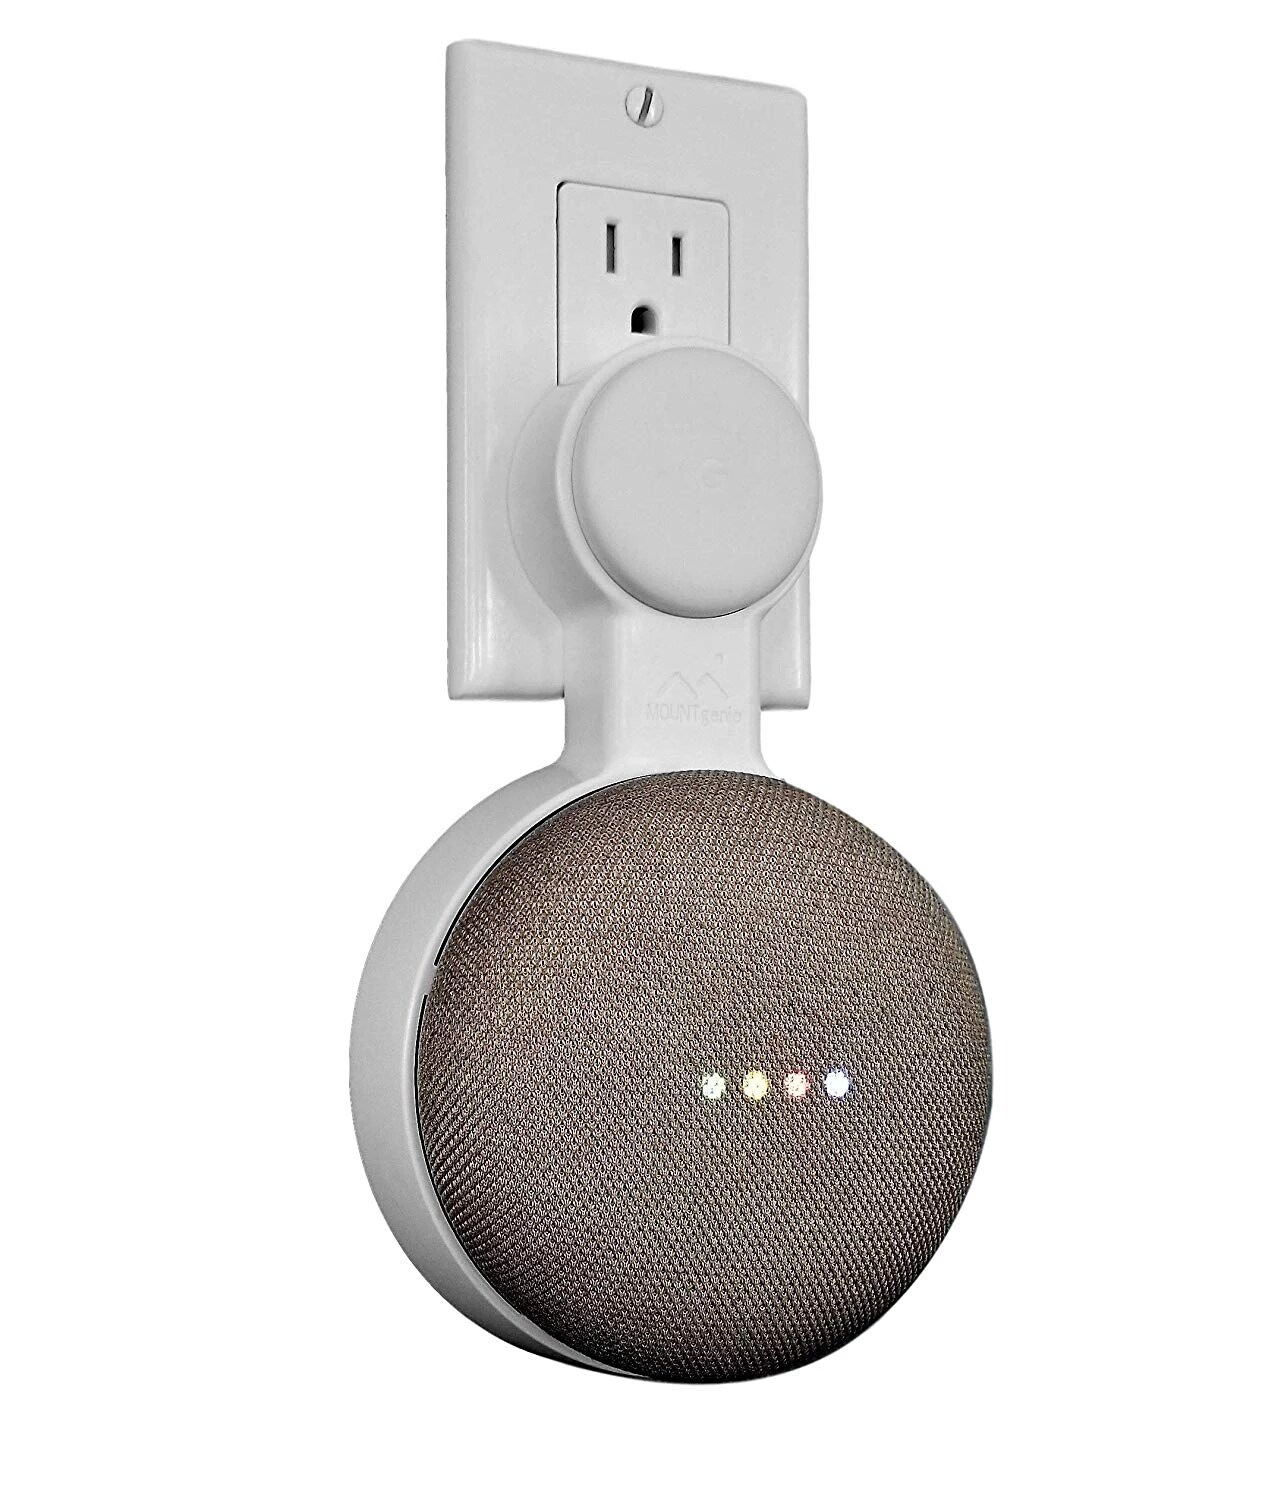 Dot Genie Google Home Mini Backpack: The Simplest and Cleanest Outlet Wall Mount Hanger Stand for Home Mini Voice Assistants by Google No Cord Wrapping Required White Designed in USA 